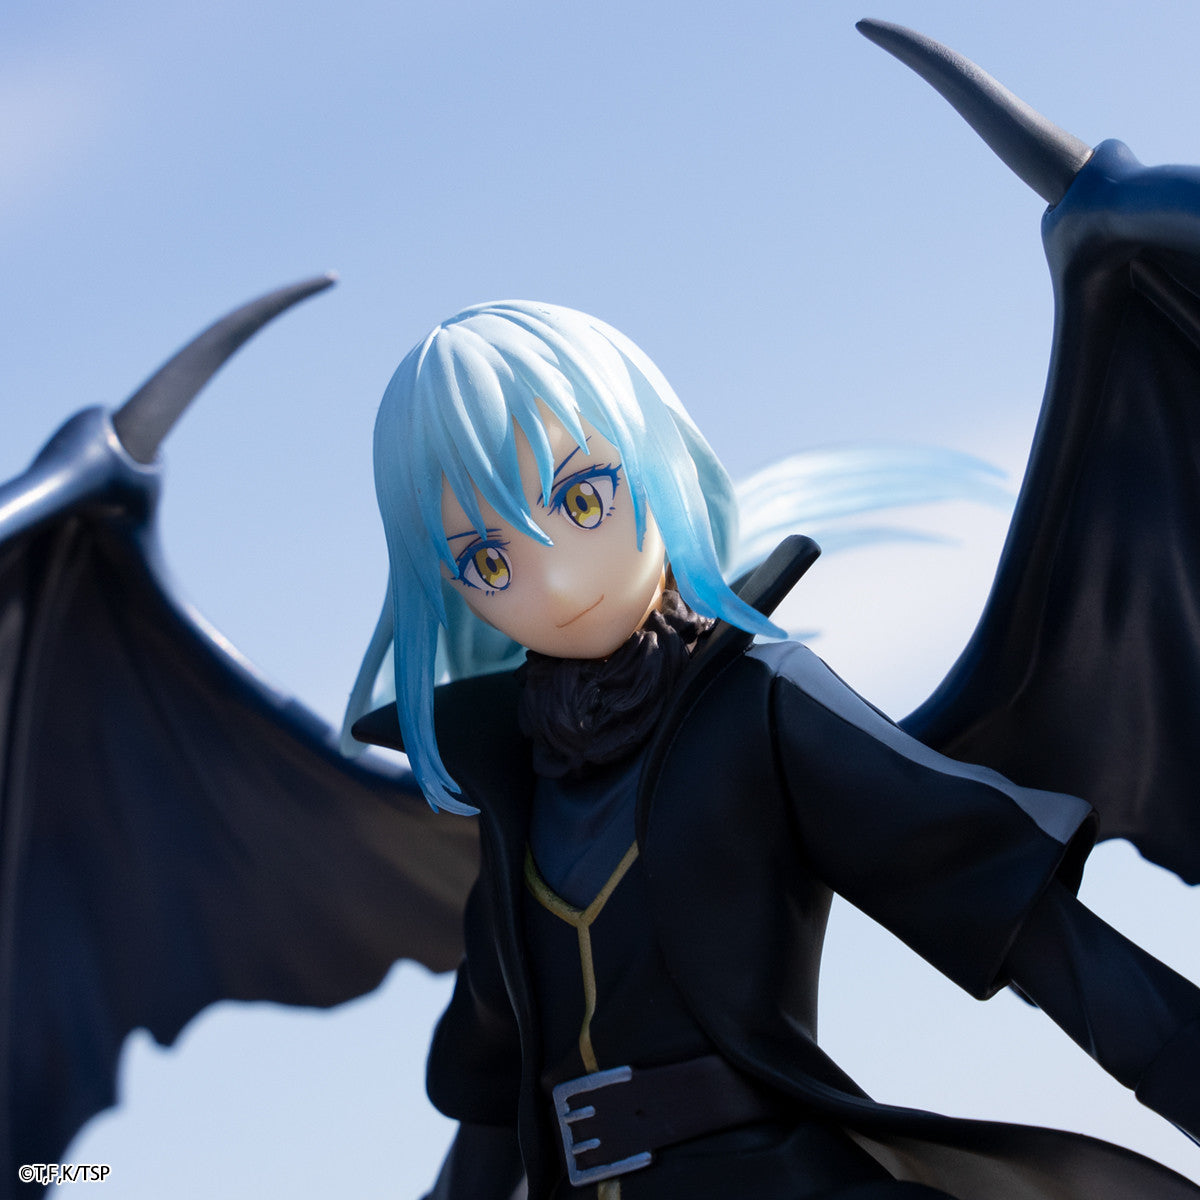 That Time I Got Reincarnated As A Slime - Rimuru Tempest - Ichiban Kuji That Time I Got Reincarnated As A Slime ~Harvest Festival~ - A Prize (Bandai Spirits), Franchise: That Time I Got Reincarnated As A Slime, Brand: Bandai Spirits, Release Date: 16. Jan 2021, Type: Prize, Store Name: Nippon Figures